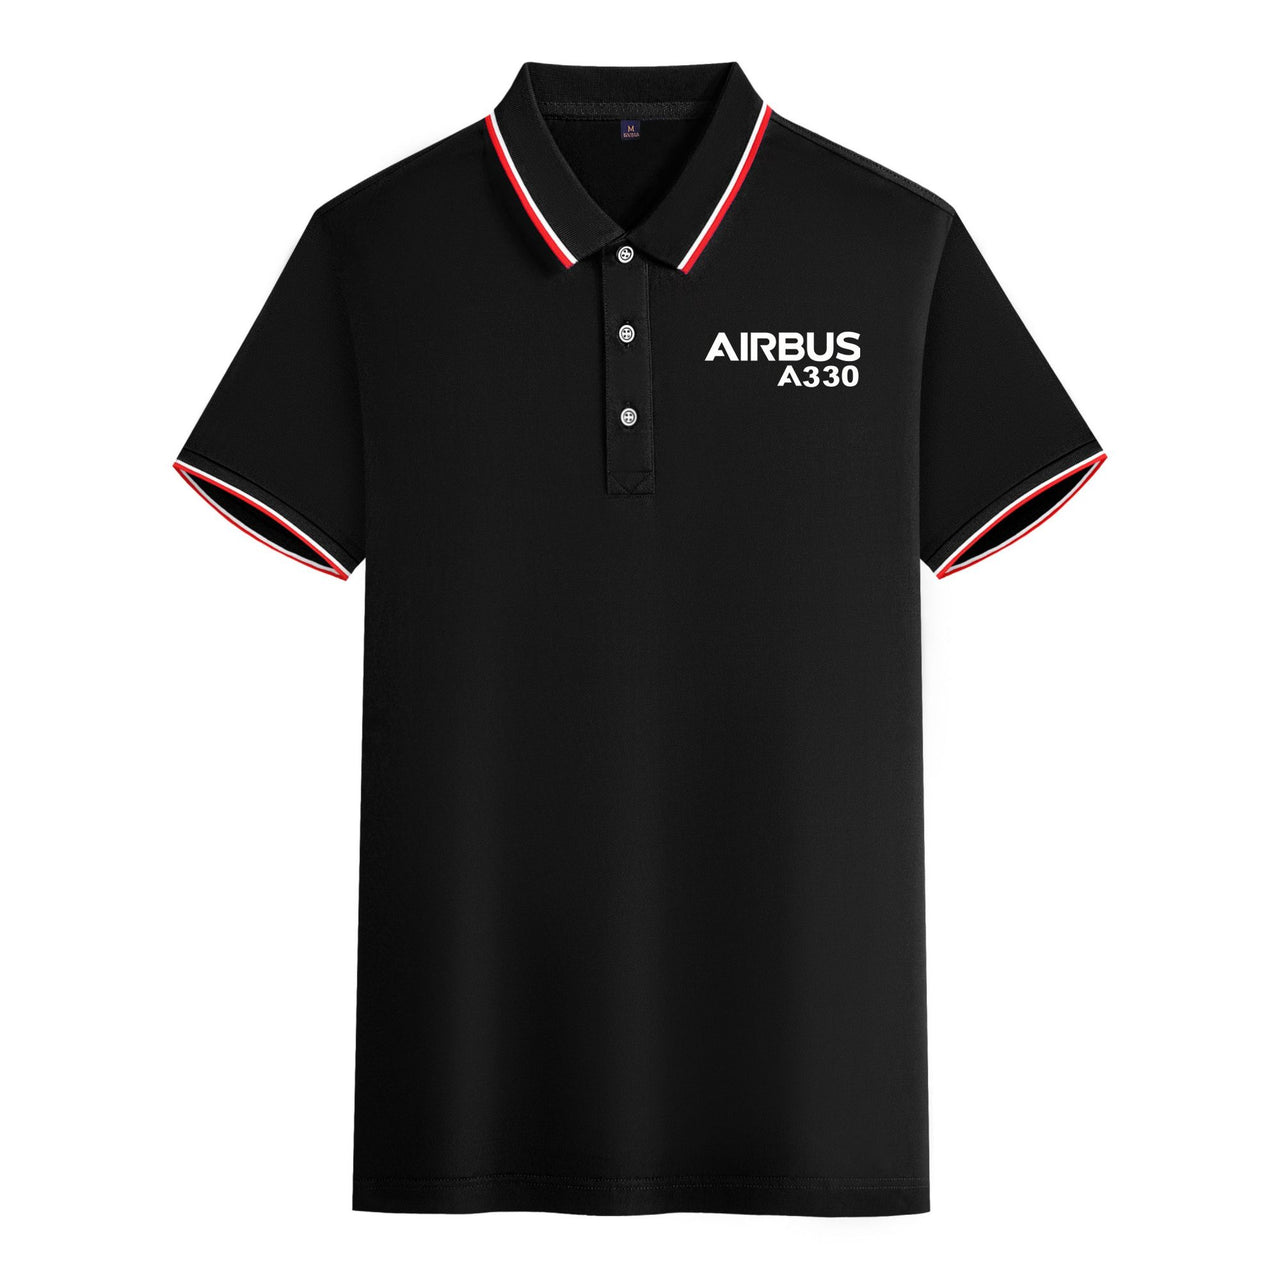 Airbus A330 & Text Designed Stylish Polo T-Shirts